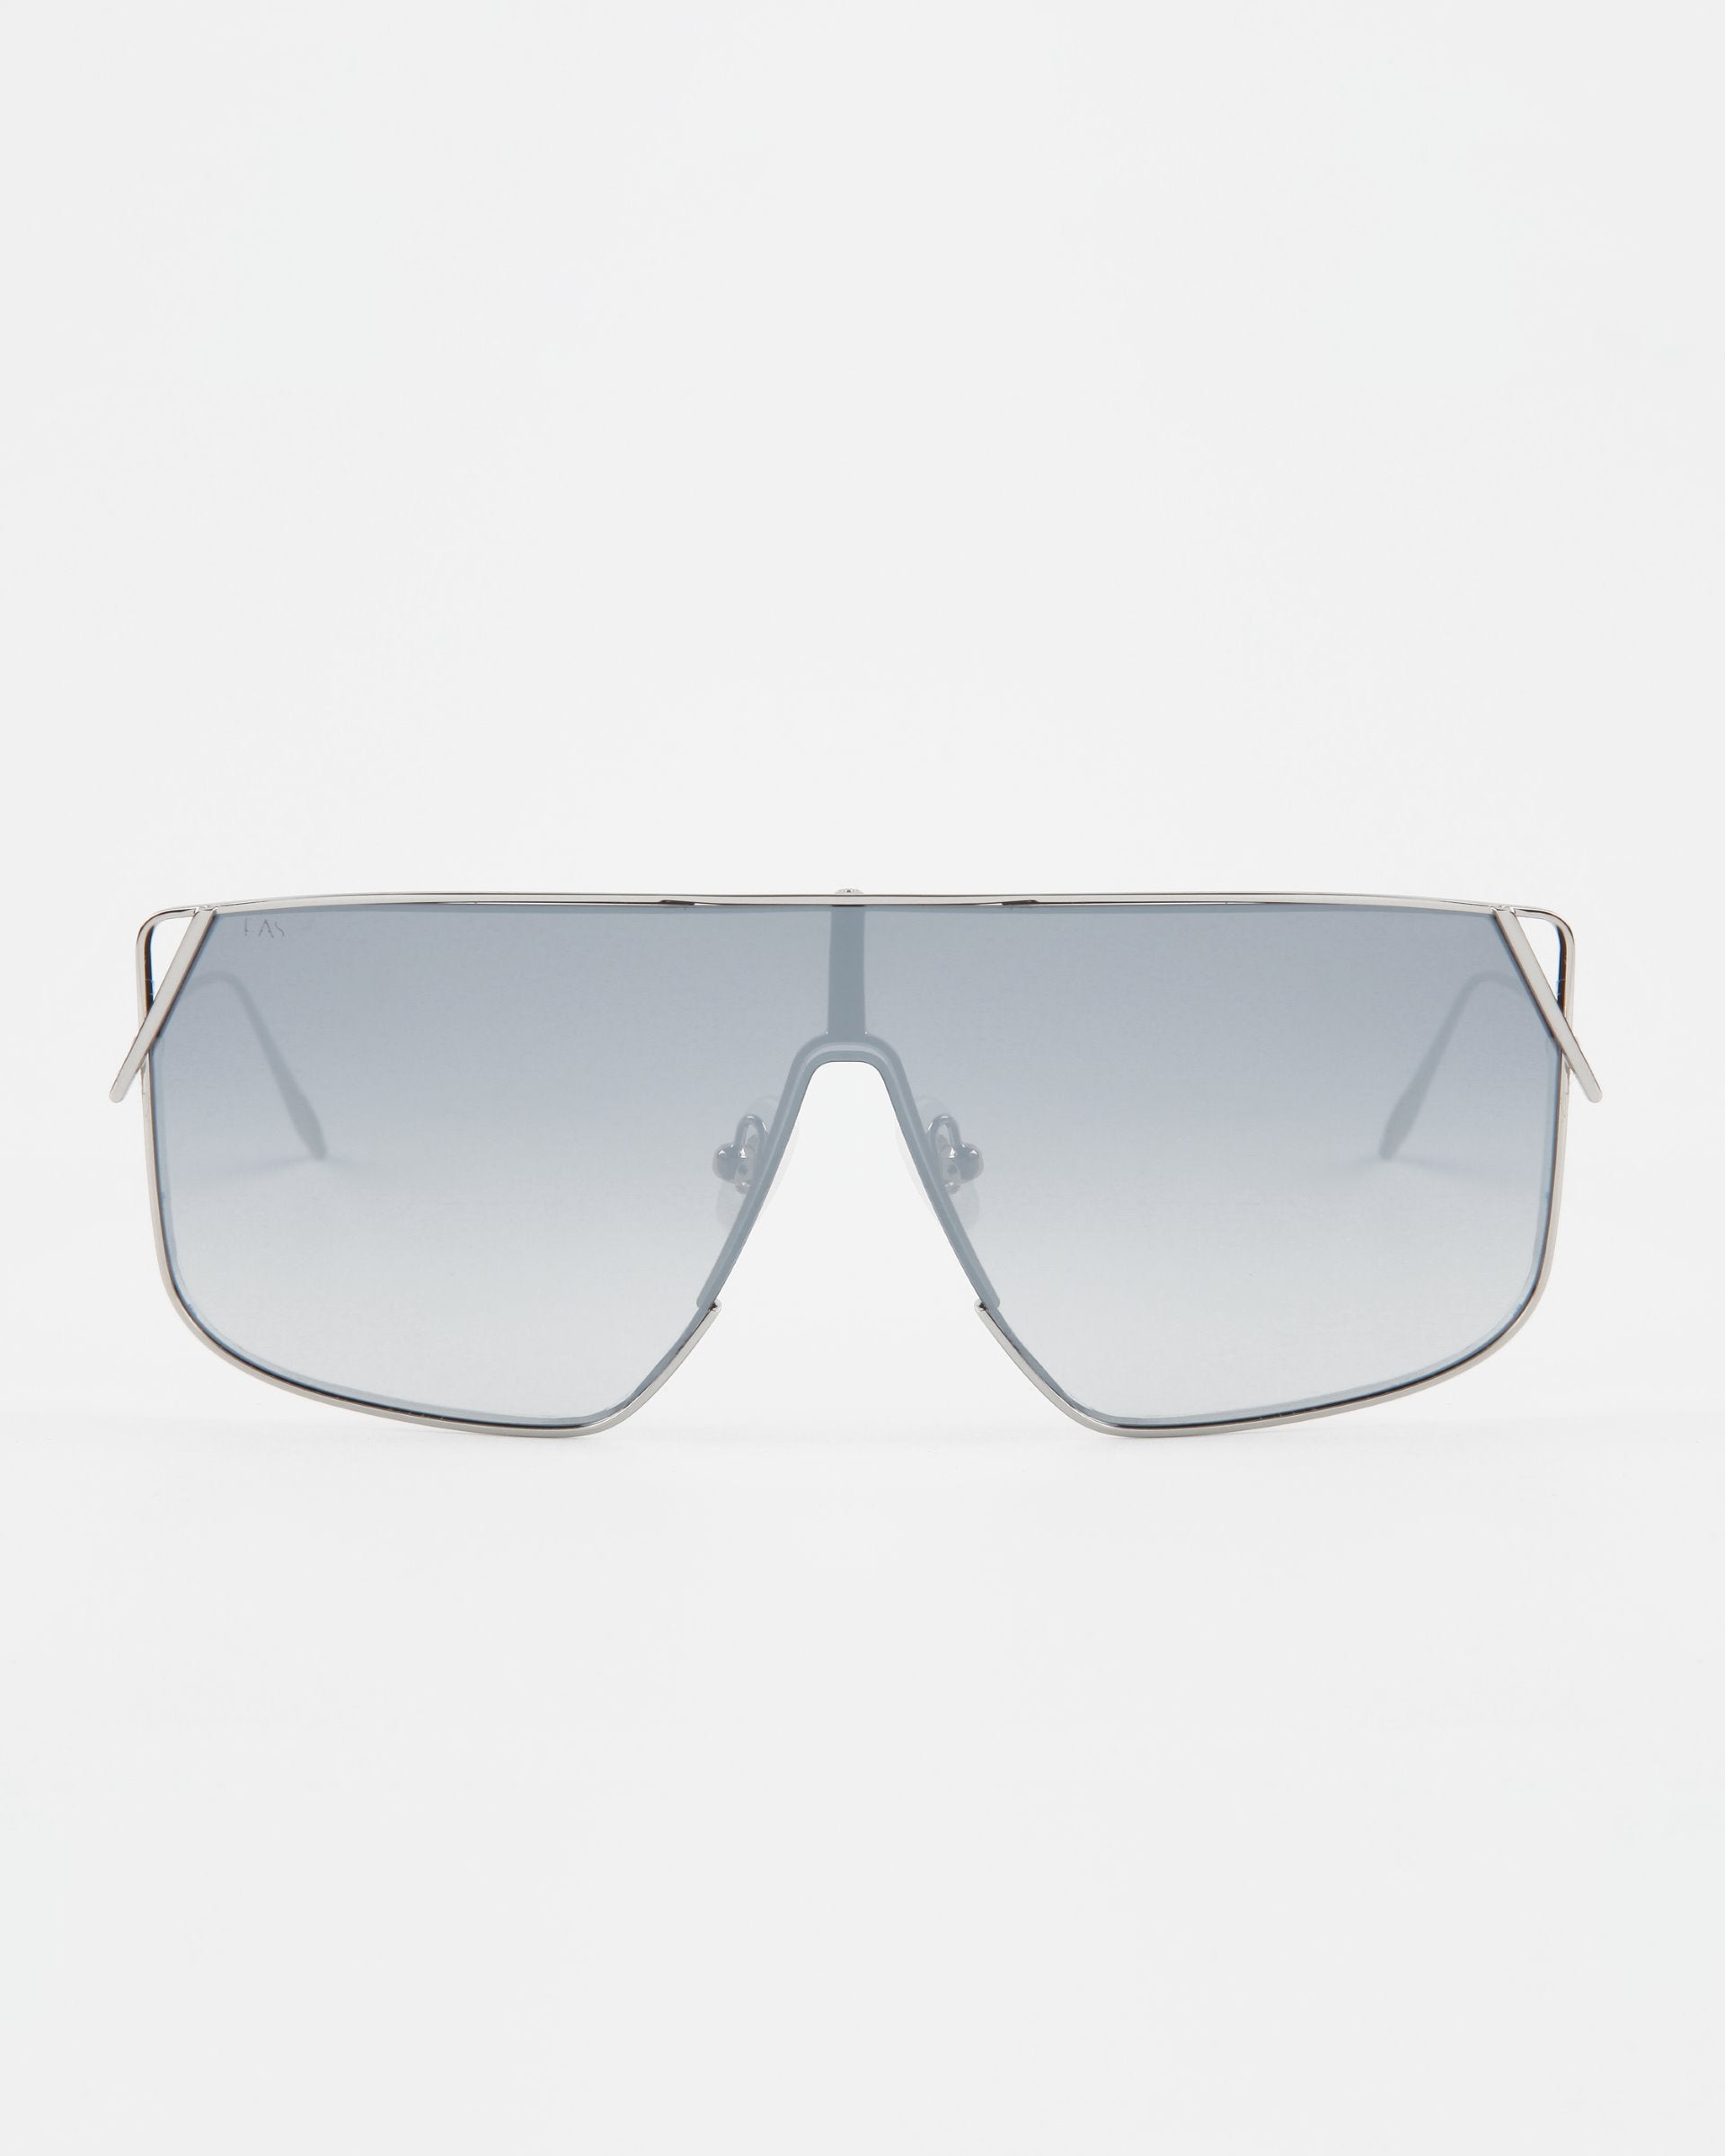 A pair of large, rectangular For Art&#39;s Sake® Horizon sunglasses with grey gradient lenses and slender stainless steel frames. The minimalist design features a double bridge, straight temple arms, and adjustable nosepads. These sunglasses offer full UVA &amp; UVB protection on a plain white background.